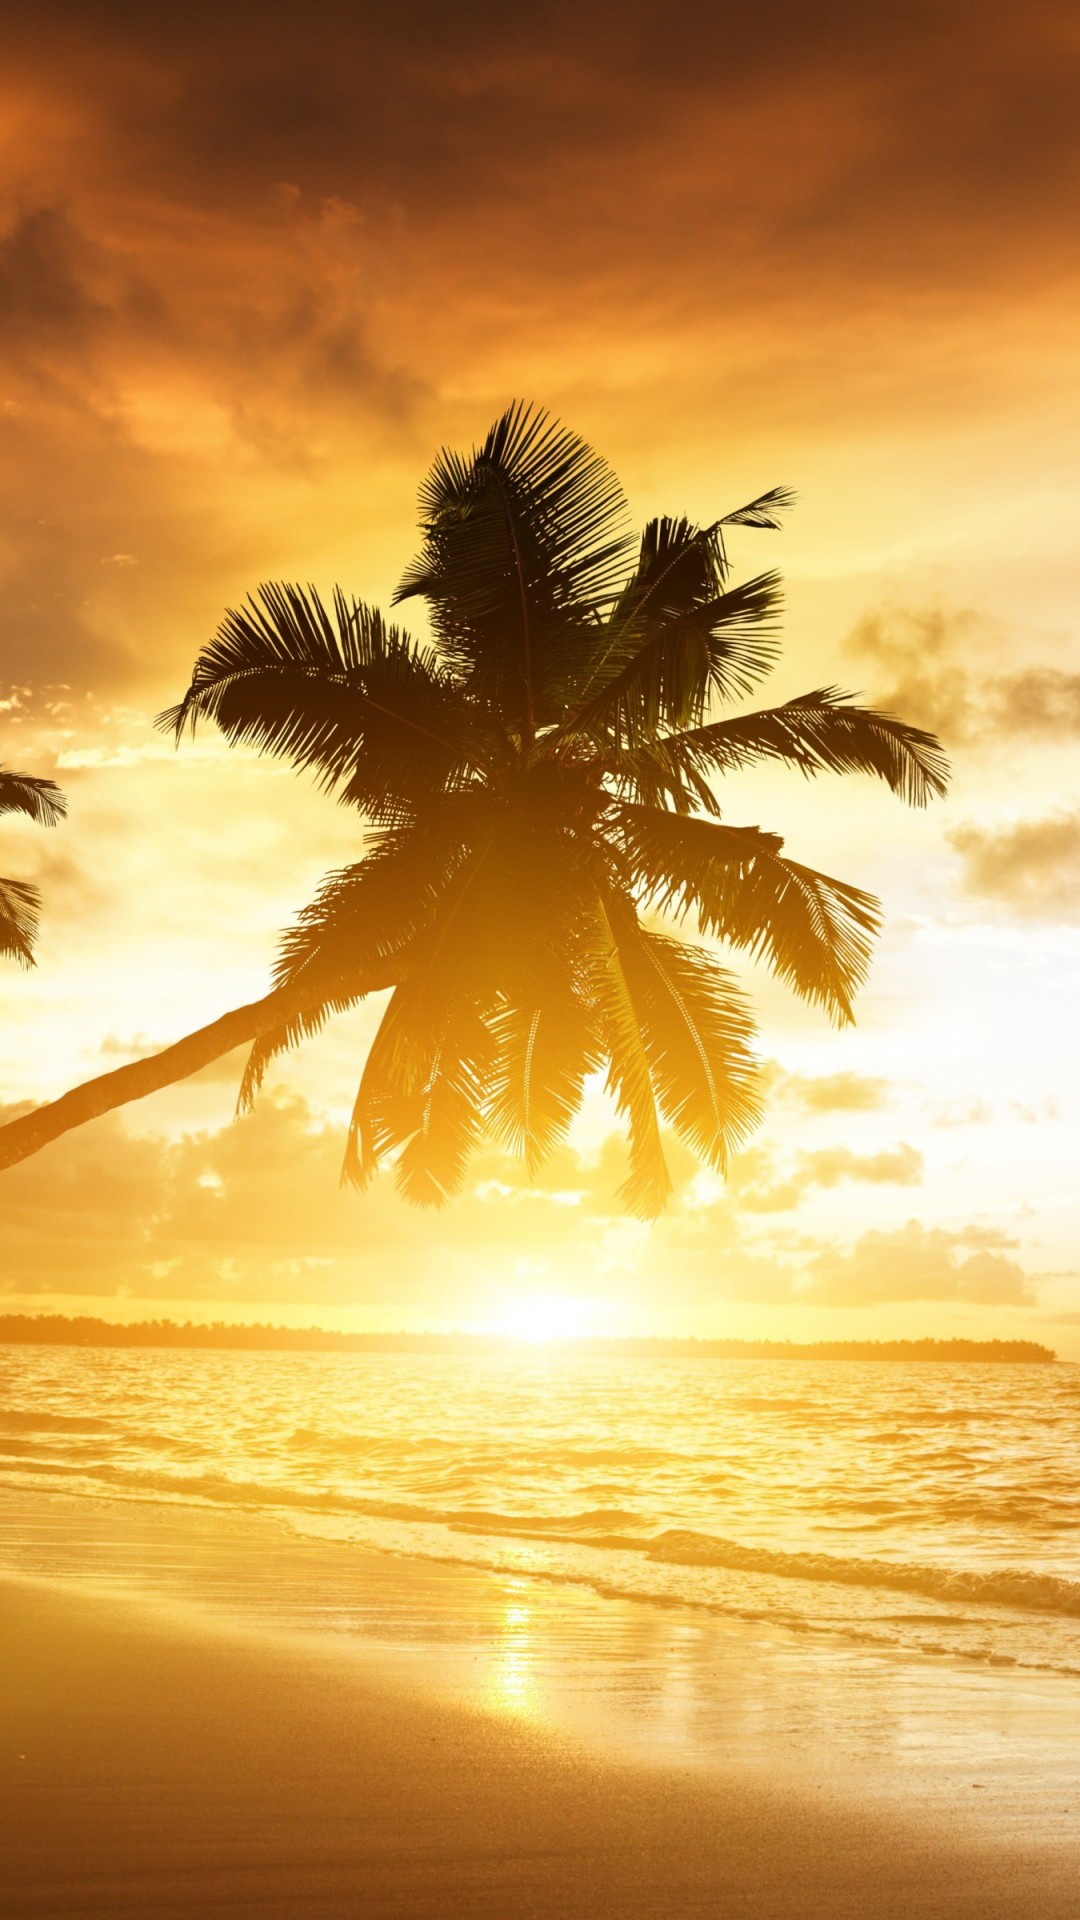 Beach With Palm Trees At Sunset Wallpaper for LG G2